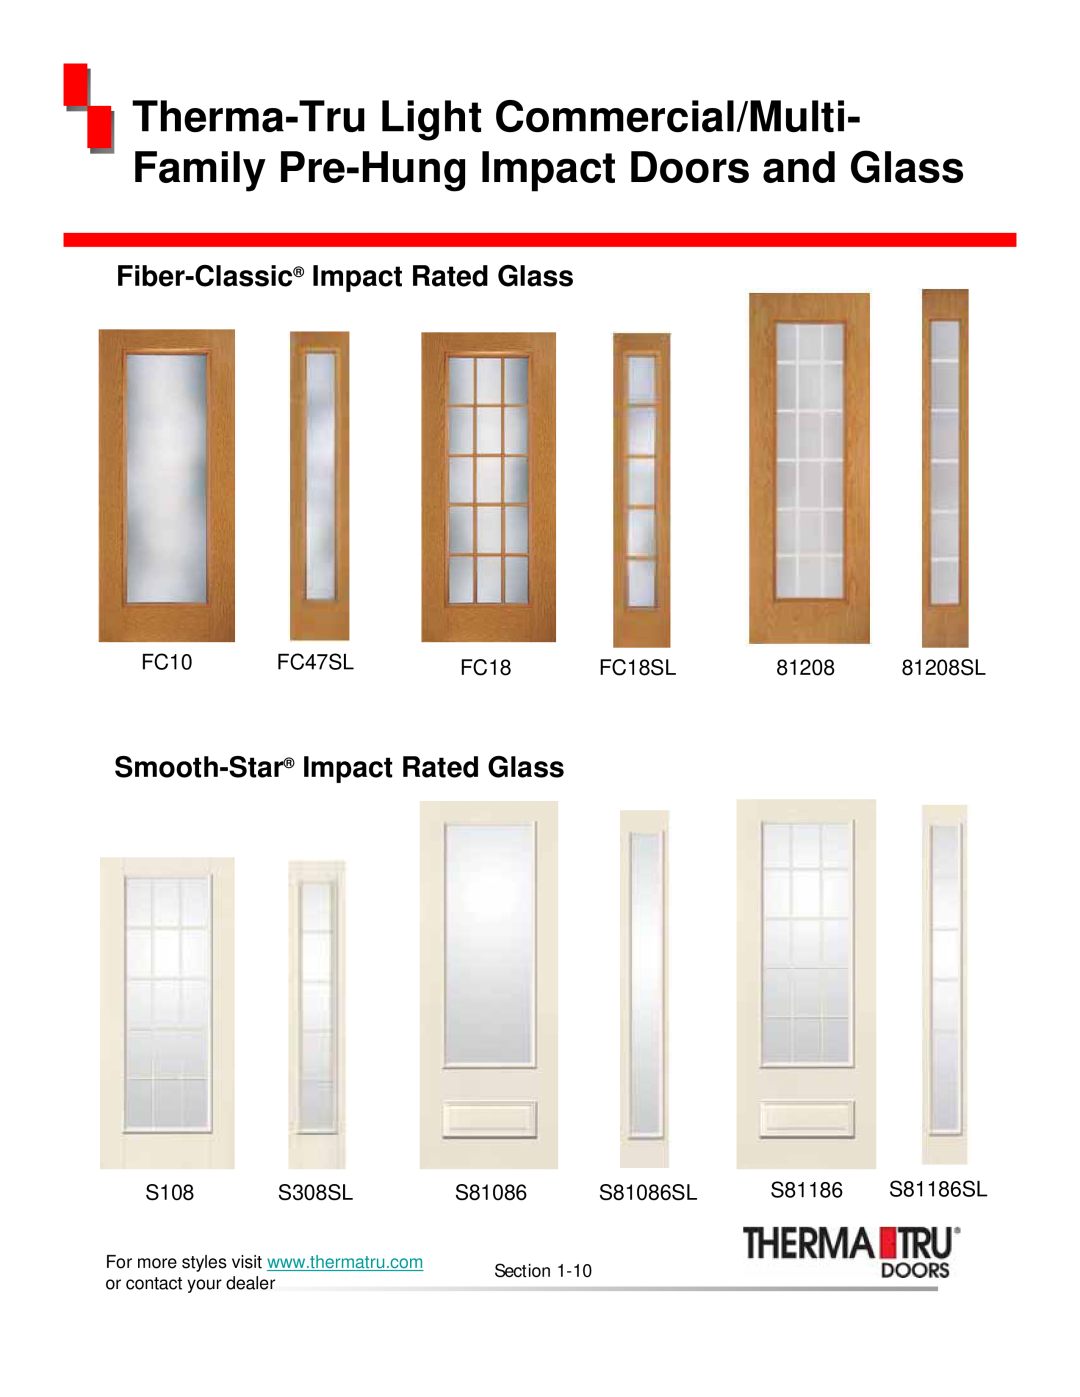 Therma-Tru none manual Fiber-Classic Impact Rated Glass, Smooth-Star Impact Rated Glass 